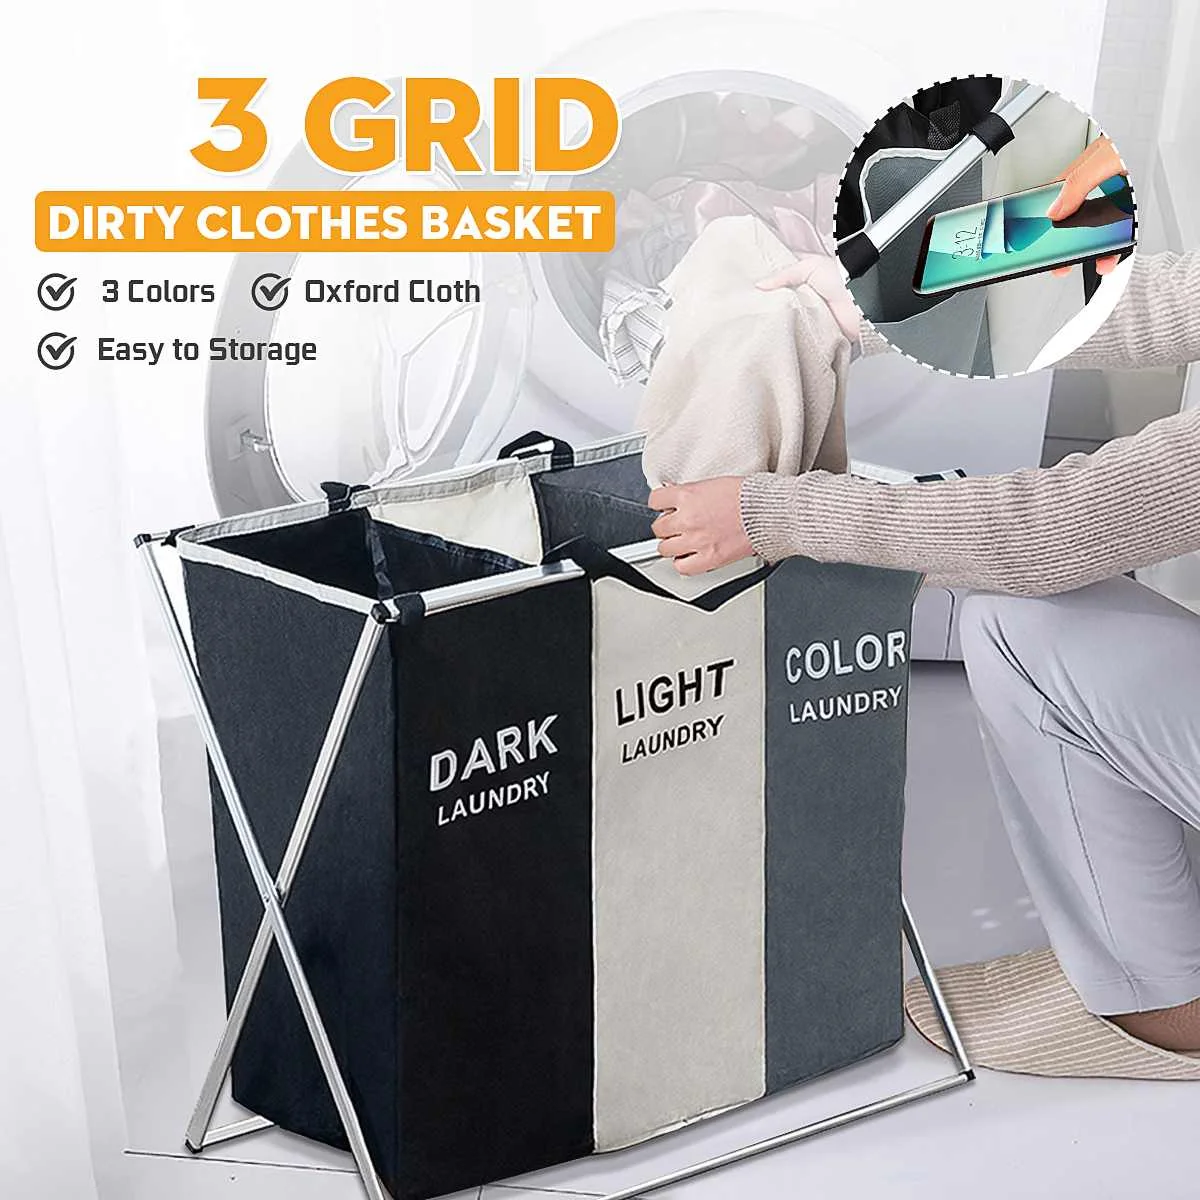 

2/3 Grid Oxford Cloth Foldable Laundry Basket Organizer For Dirty Clothes Laundry Hamper Large Sorter Collapsible Folding Baske